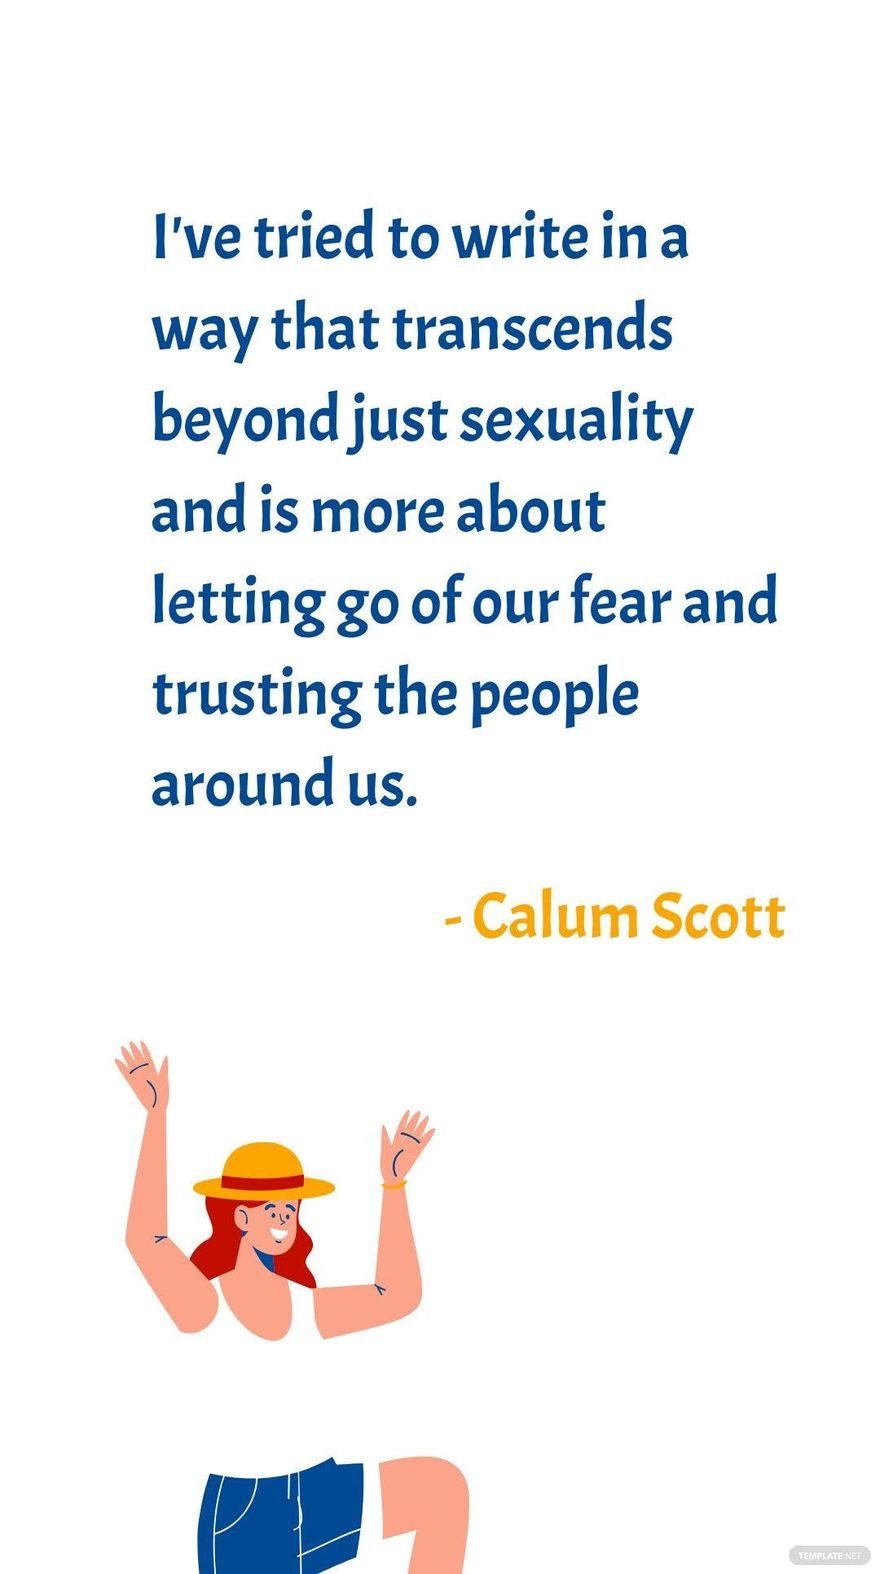 Calum Scott - I've tried to write in a way that transcends beyond just sexuality and is more about letting go of our fear and trusting the people around us.